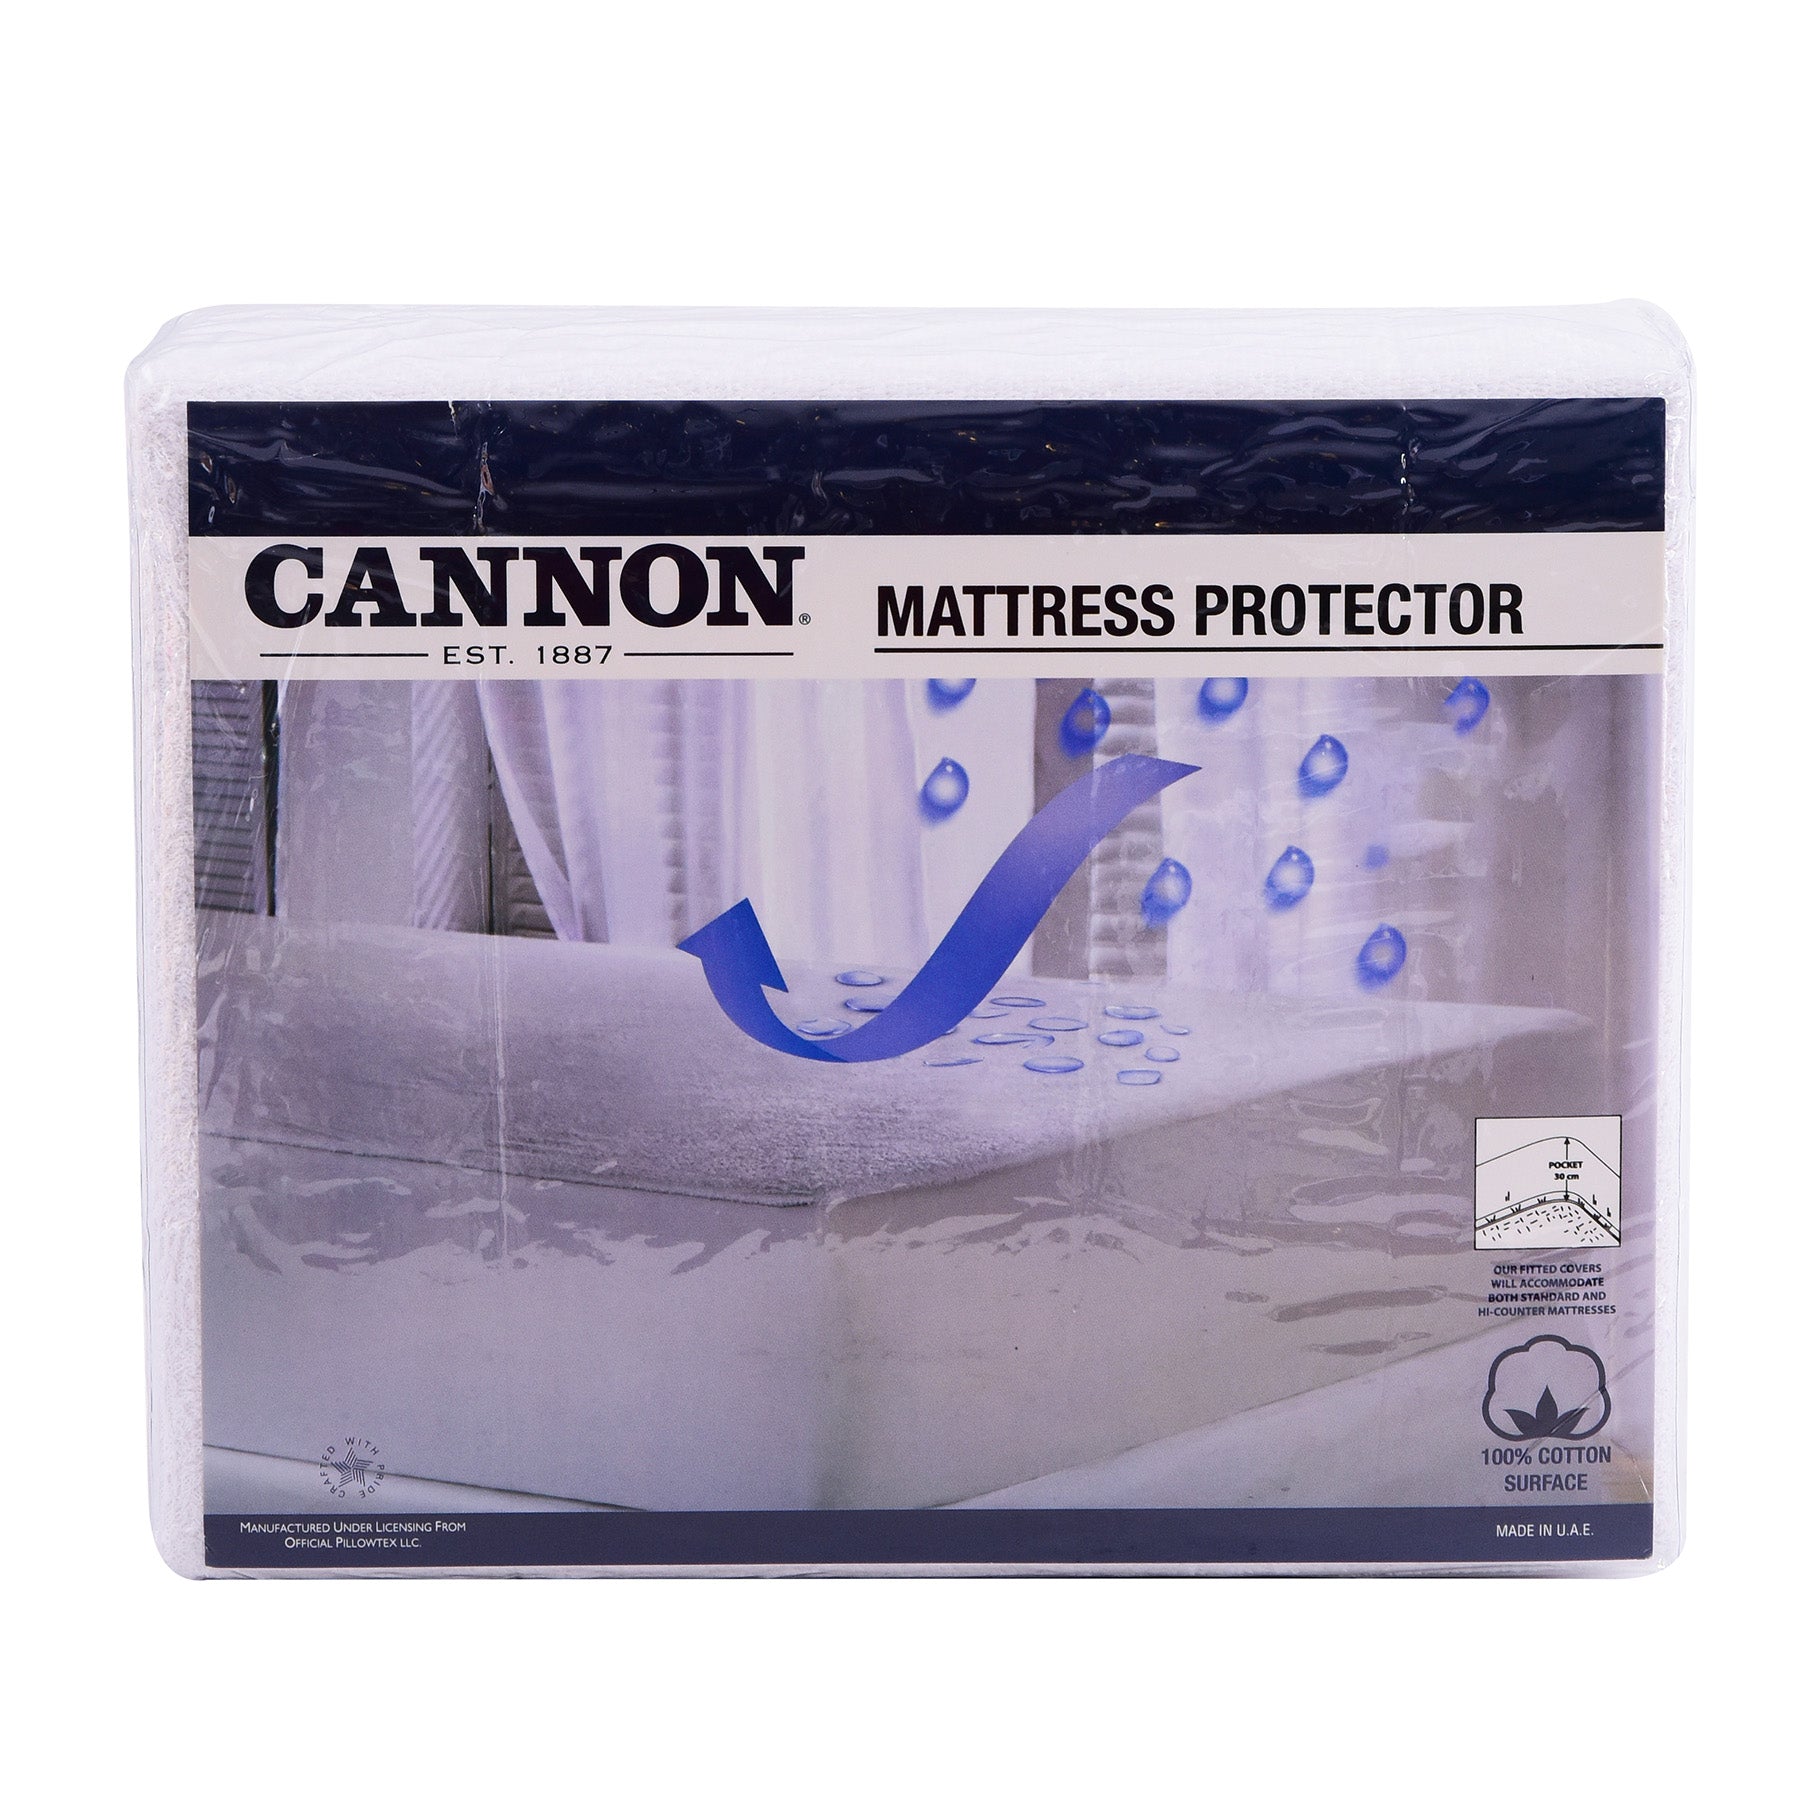 King Mattress Protector , White Color King size: 200x200cm.